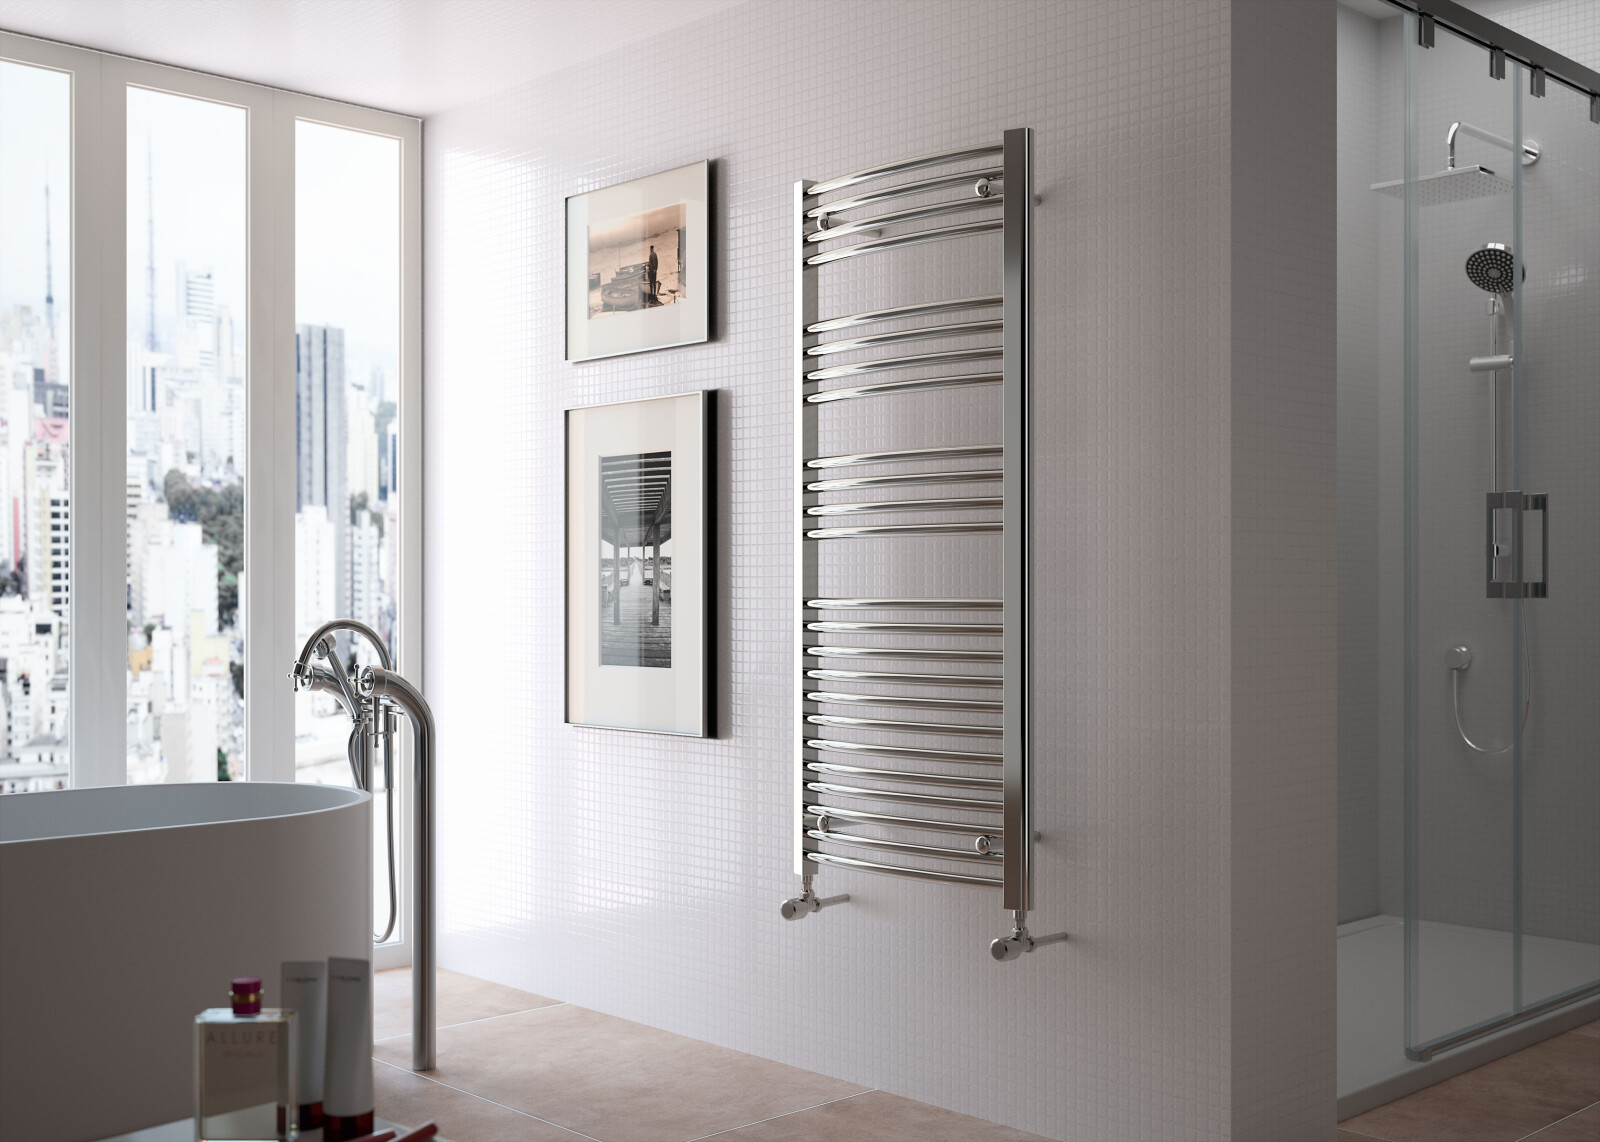 Product Lifestyle image of the Radox Premier Curved Chrome Towel Radiator